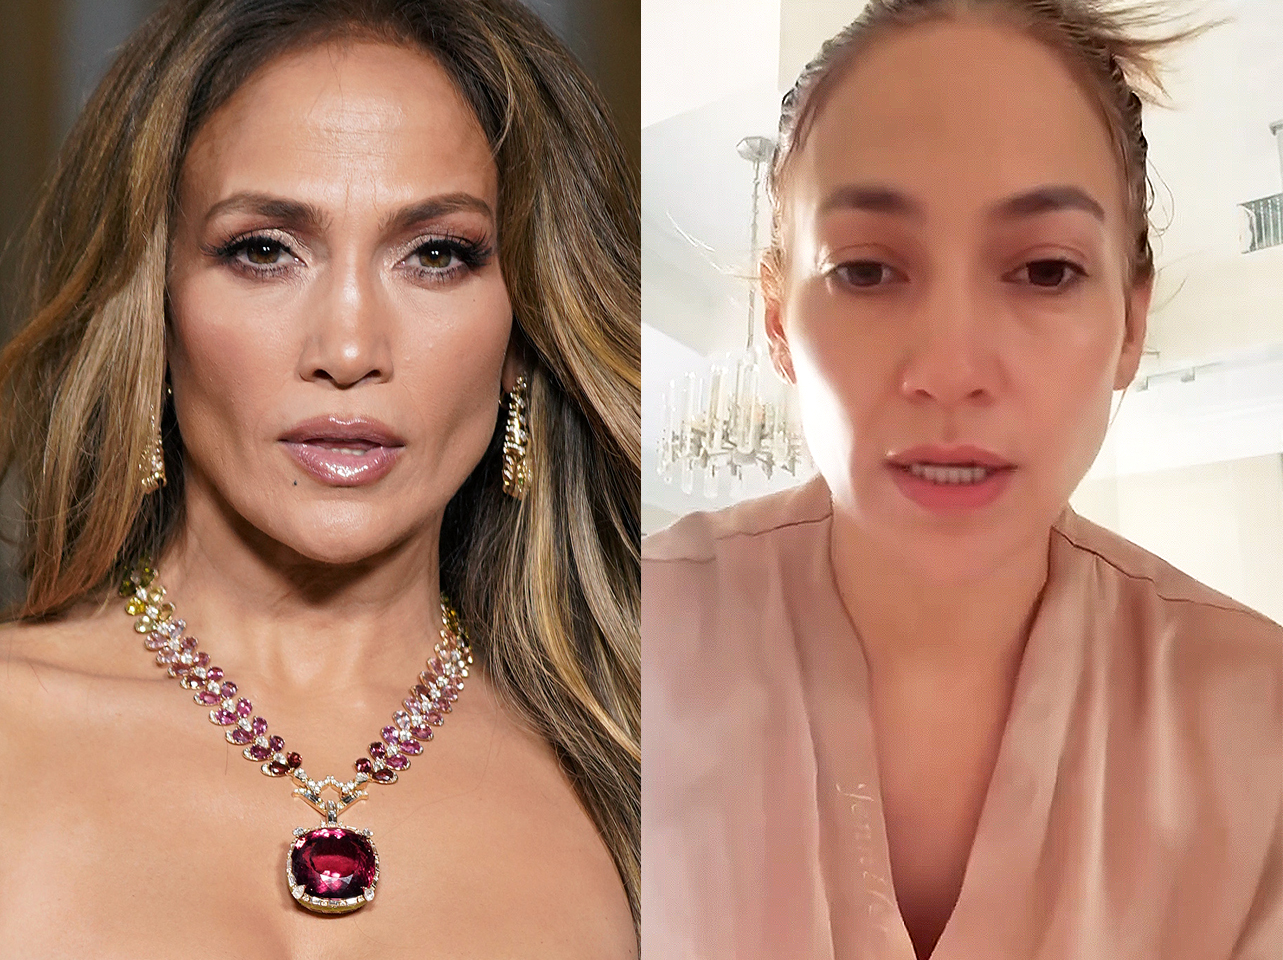 Jennifer Lopez with makeup vs without makeup | Source: Getty Images | Instagram/jlo